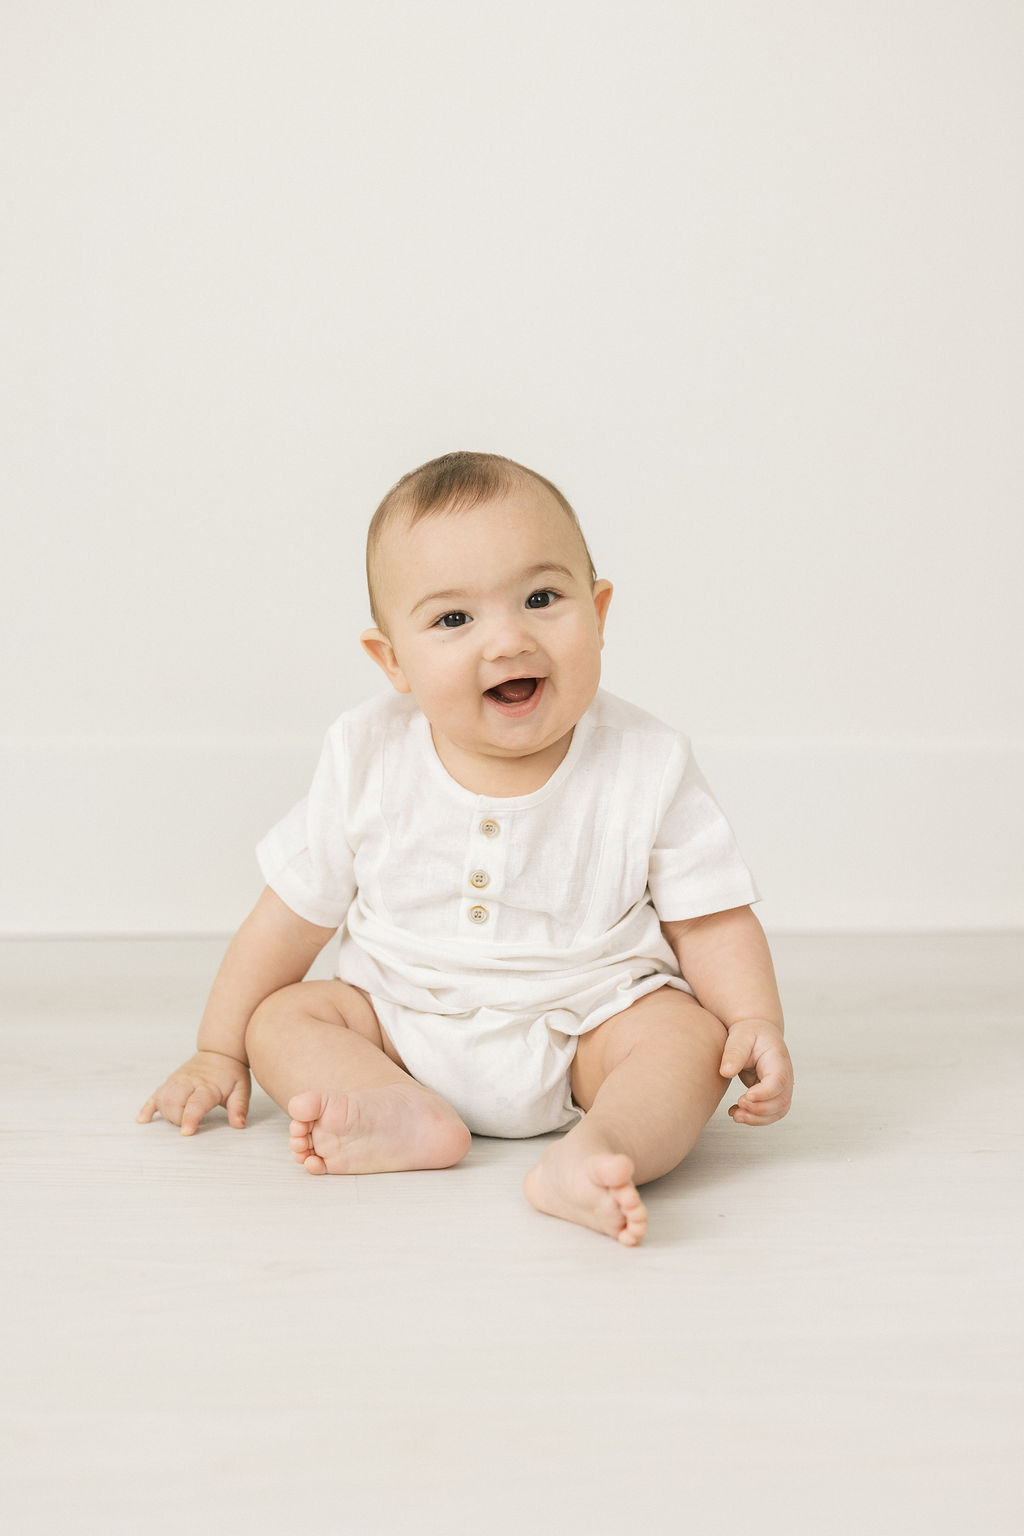 A toddler sits on a studio floor in a white onesie with buttons postpartum place chatham